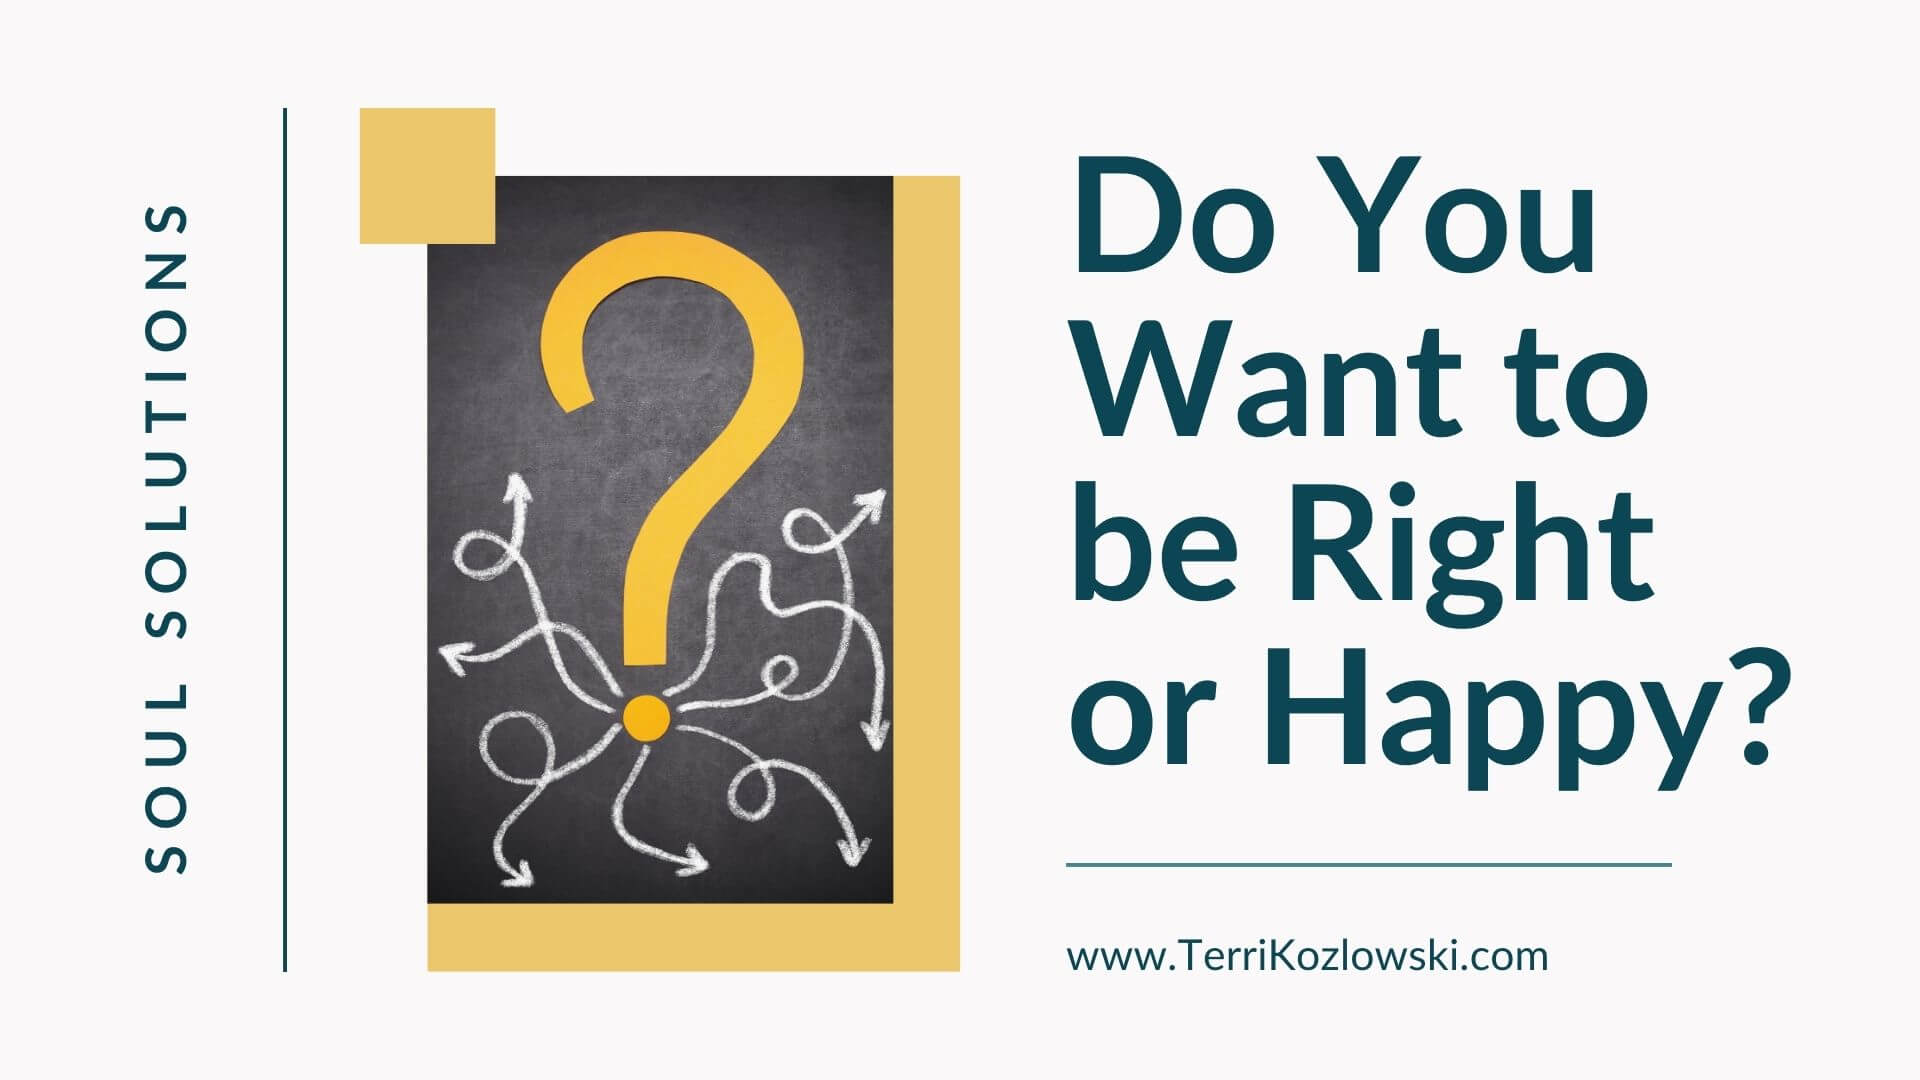 Do You Want To Be Right or Happy?